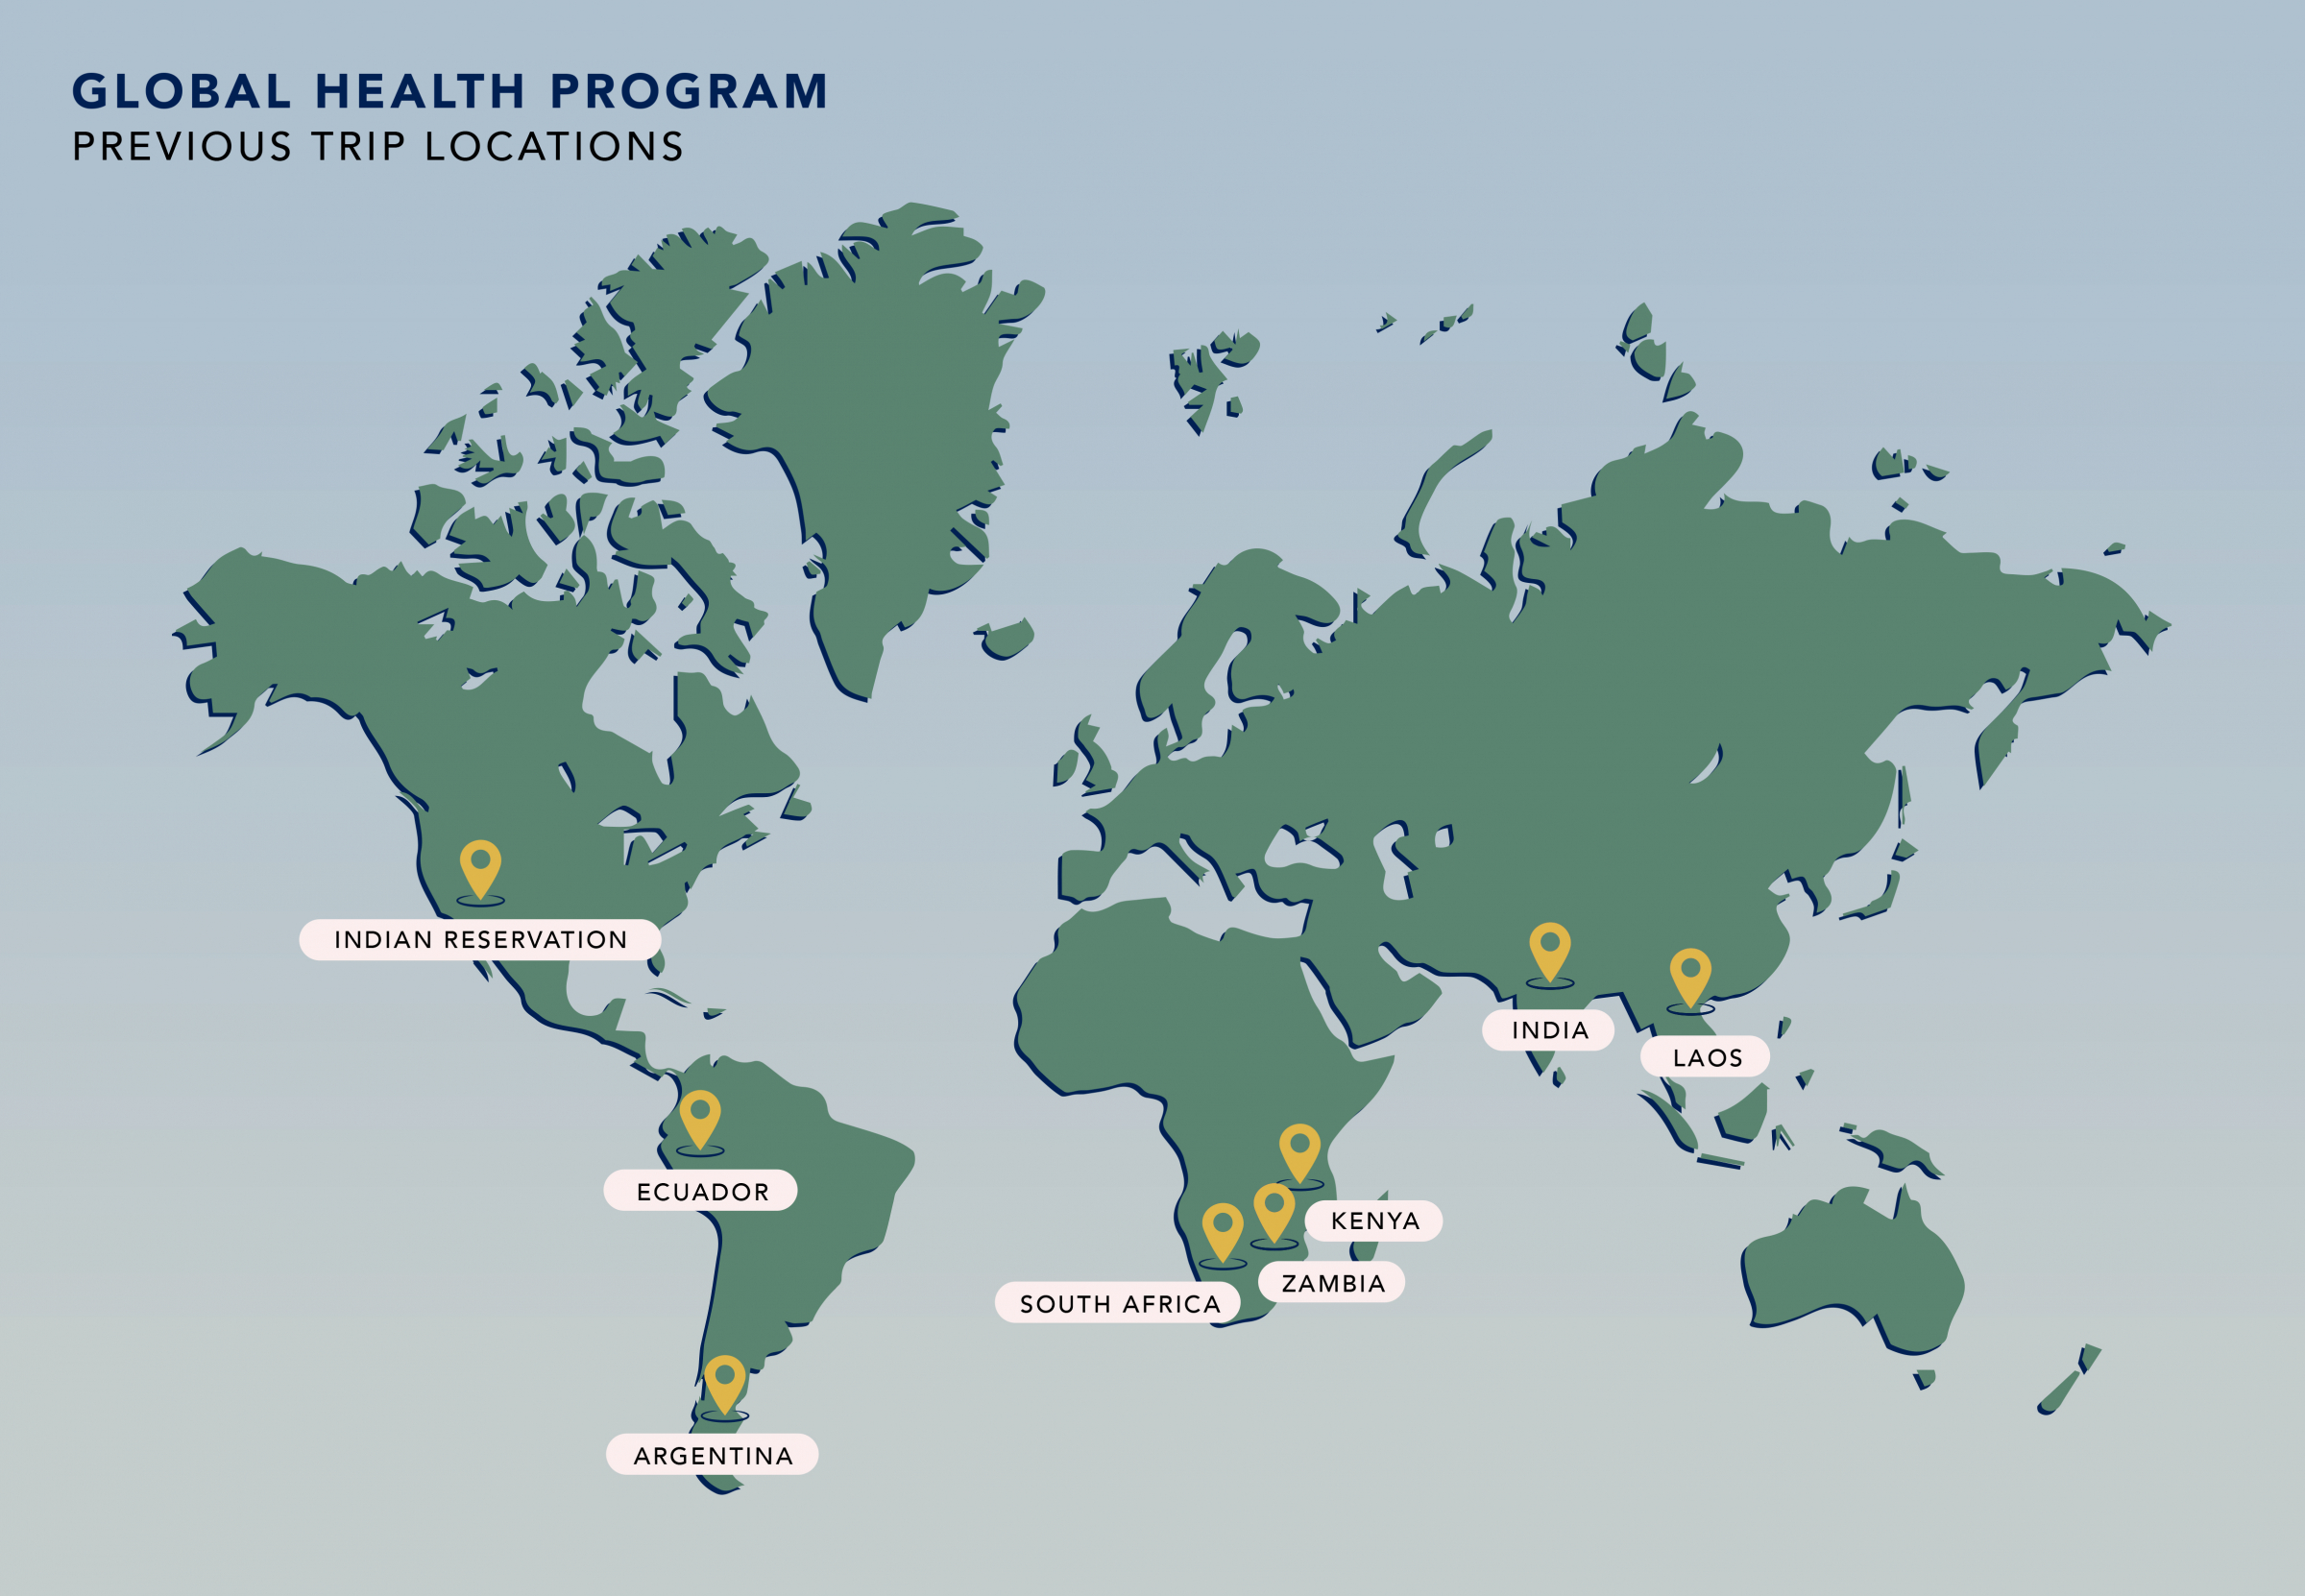 World Map highlighting the following Global Health Program locations of previous trips: Indian Reservation, Ecuador, Argentina, South Africa, Zambia, Kenya, India and Laos